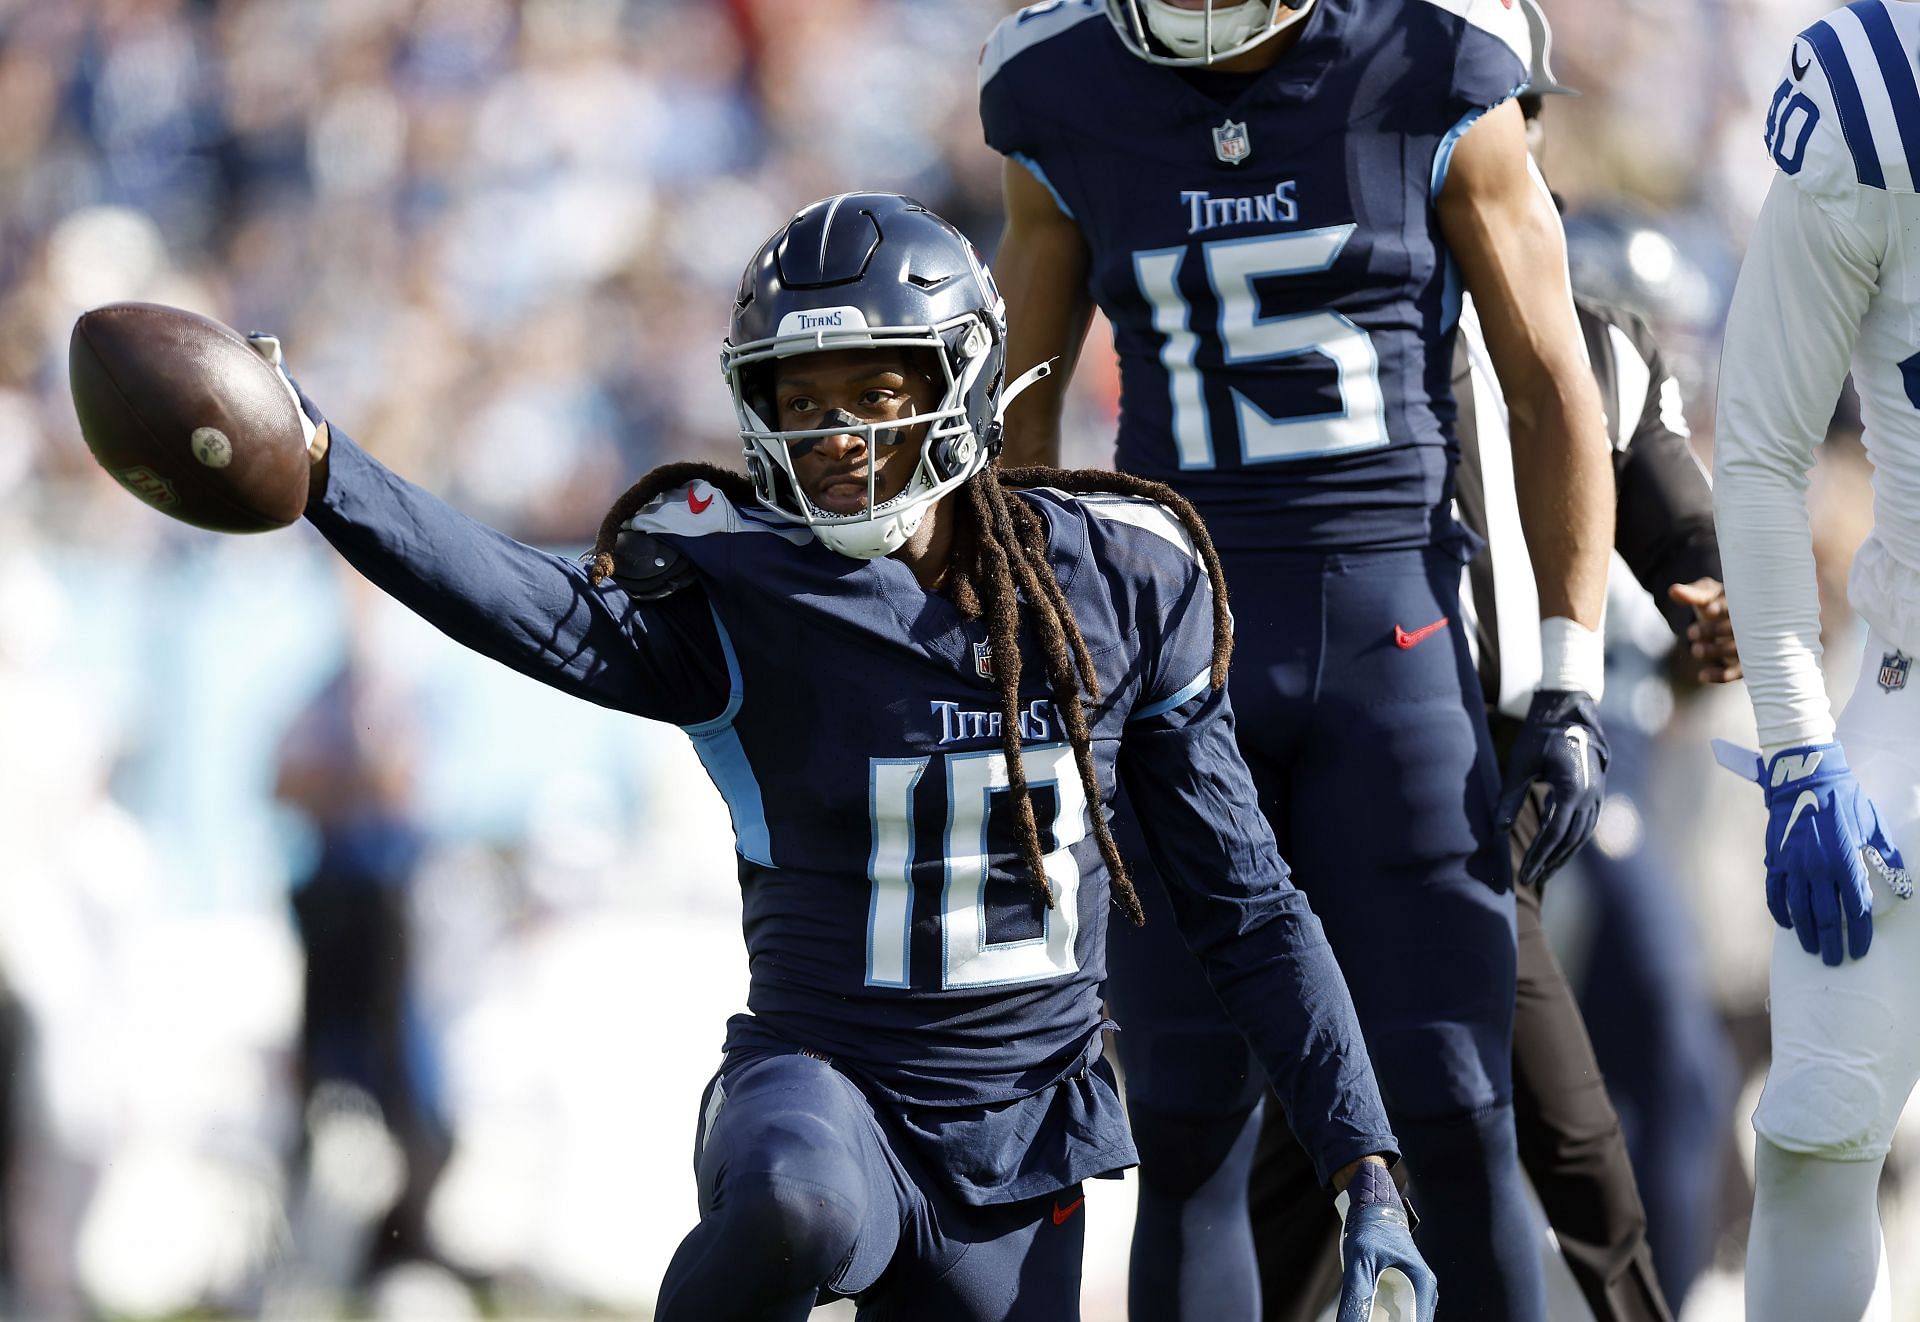 DeAndre Hopkins is on a one-year contract, and the Tennessee Titans need to act on it